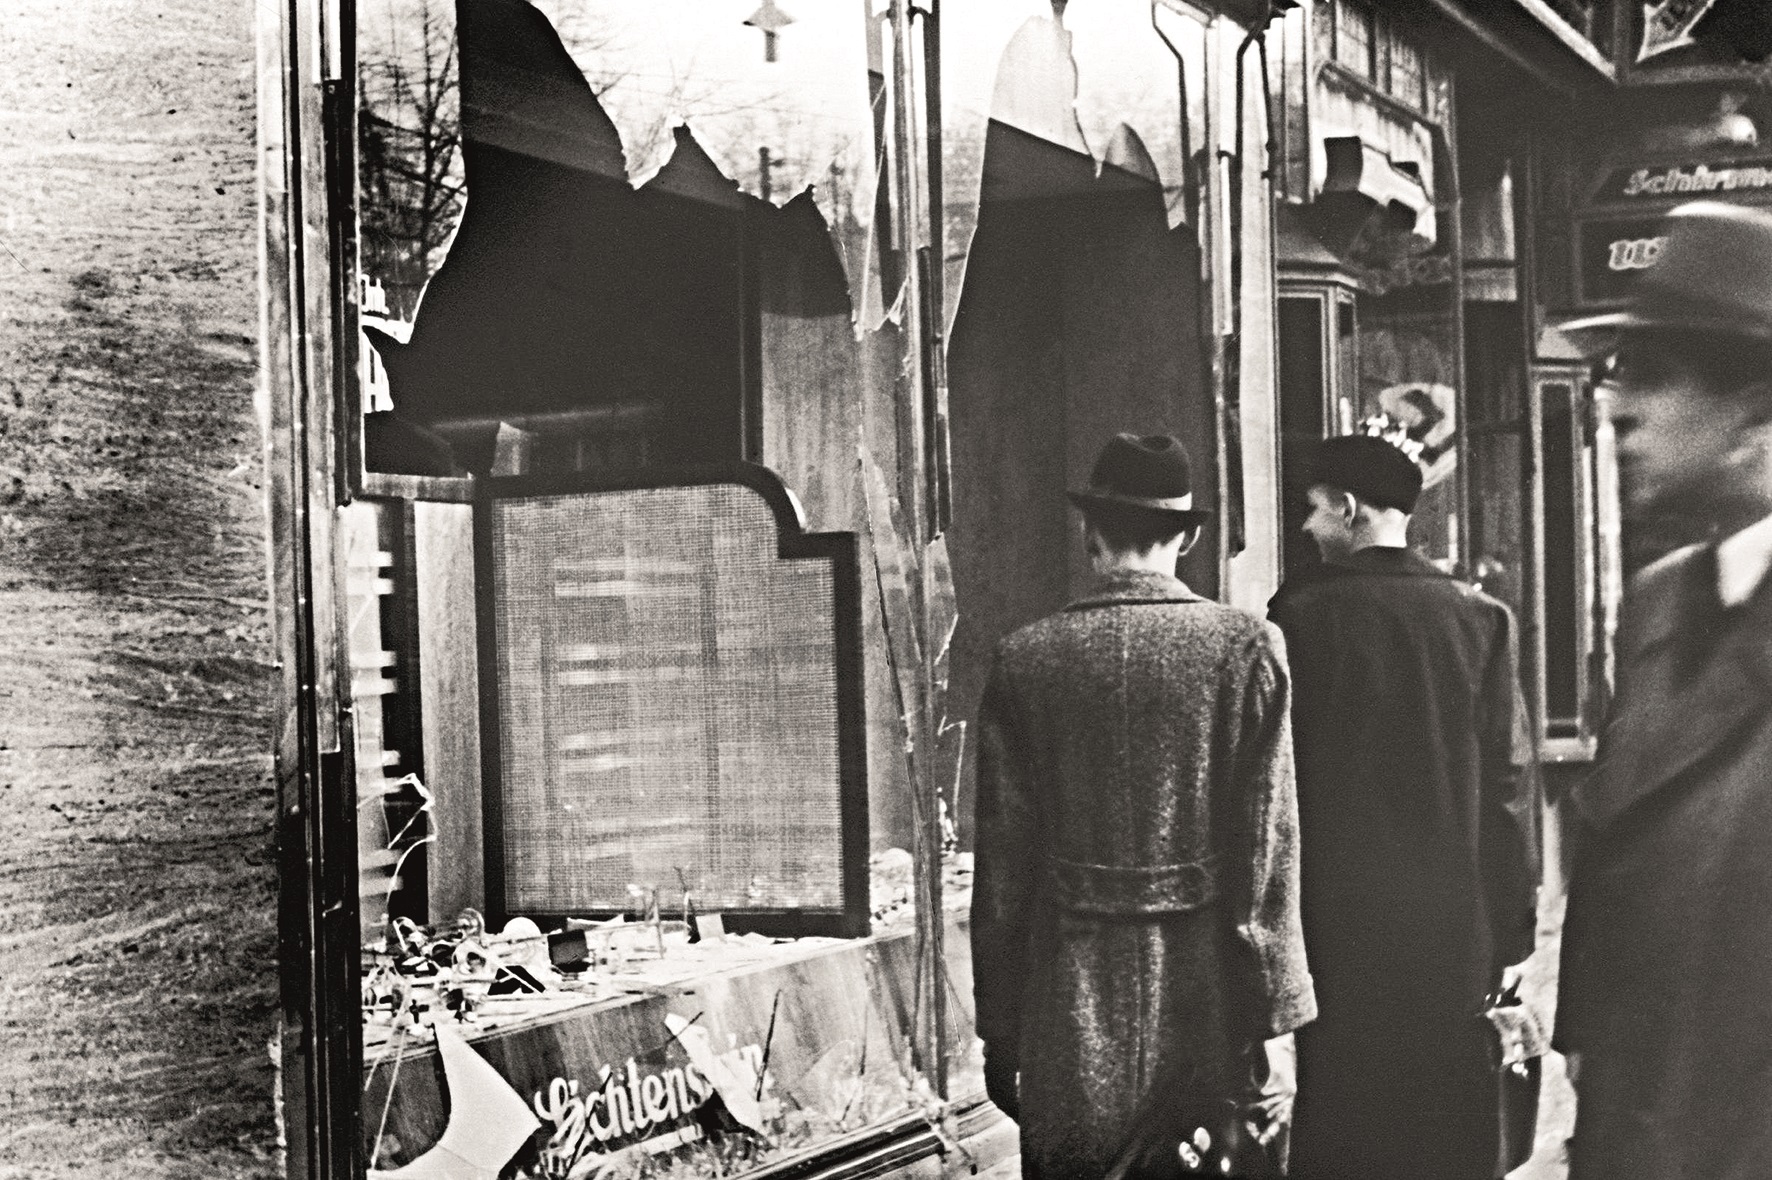 Holocaust survivorled campaign relaunched on Kristallnacht anniversary